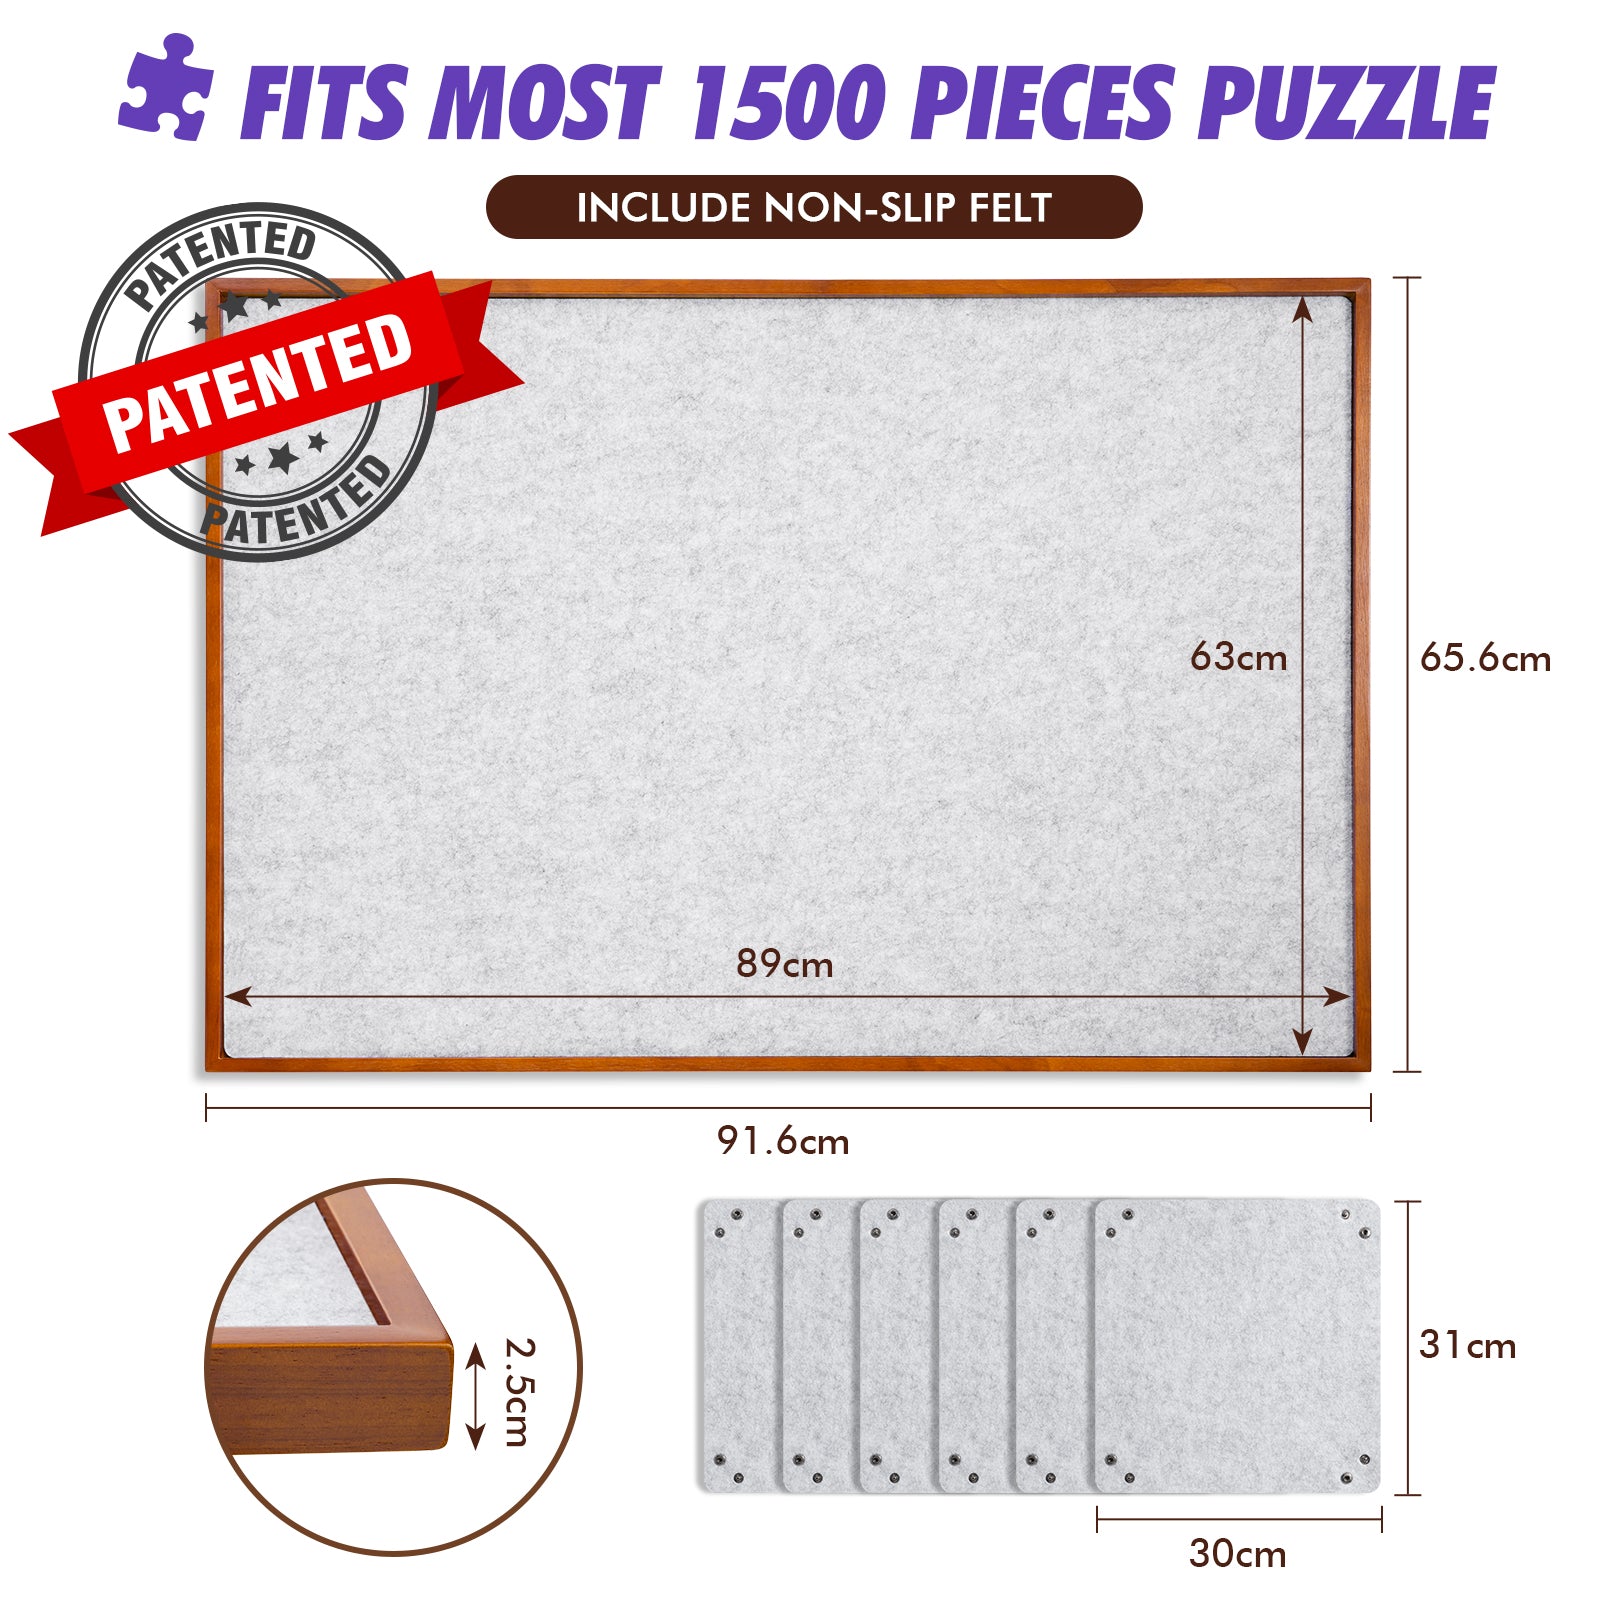 Patented】Adjustable Height & Tilt Jigsaw Puzzle Board for 1500